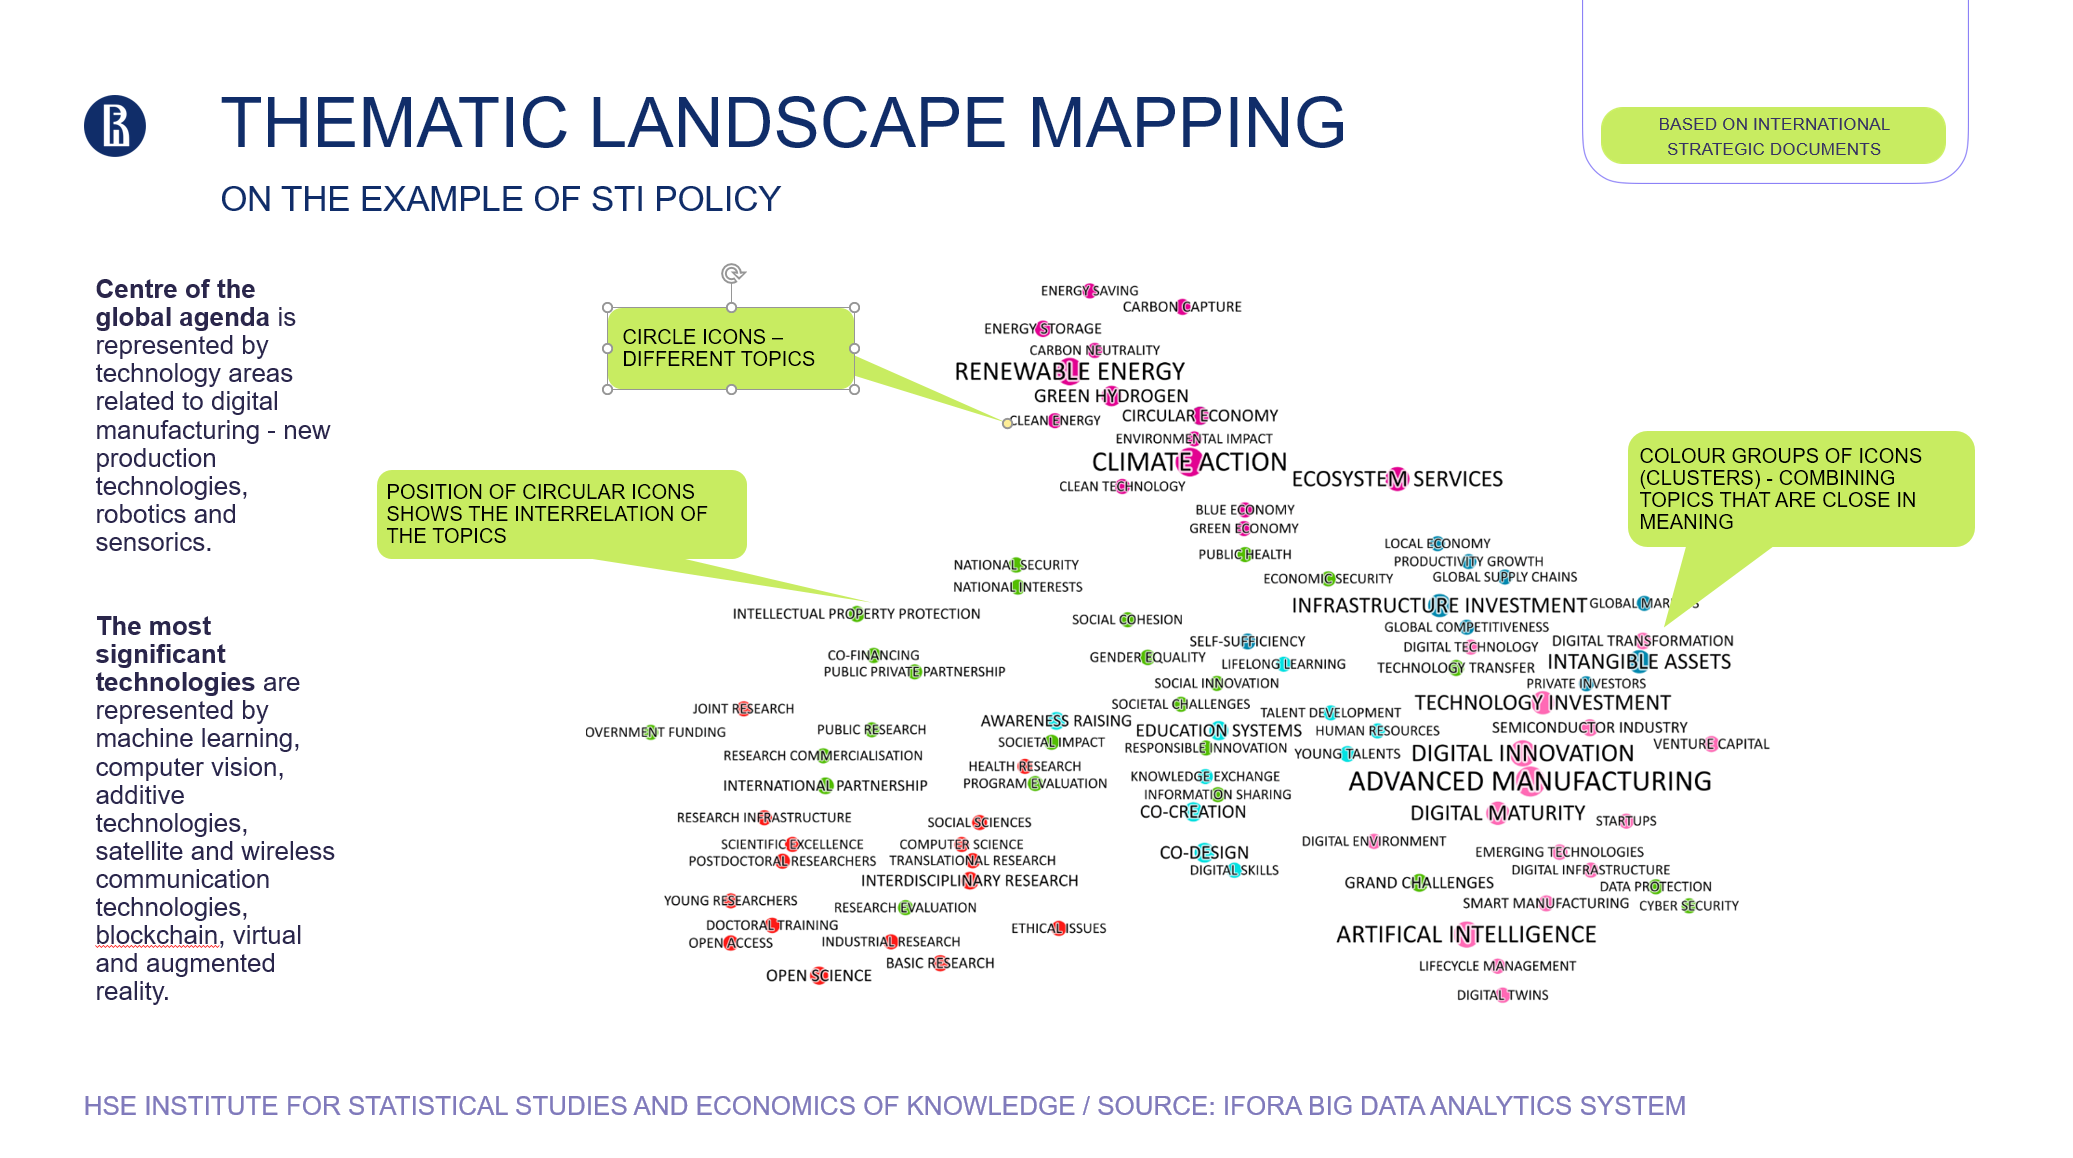 Thematic landscape mapping on the example of STI policy